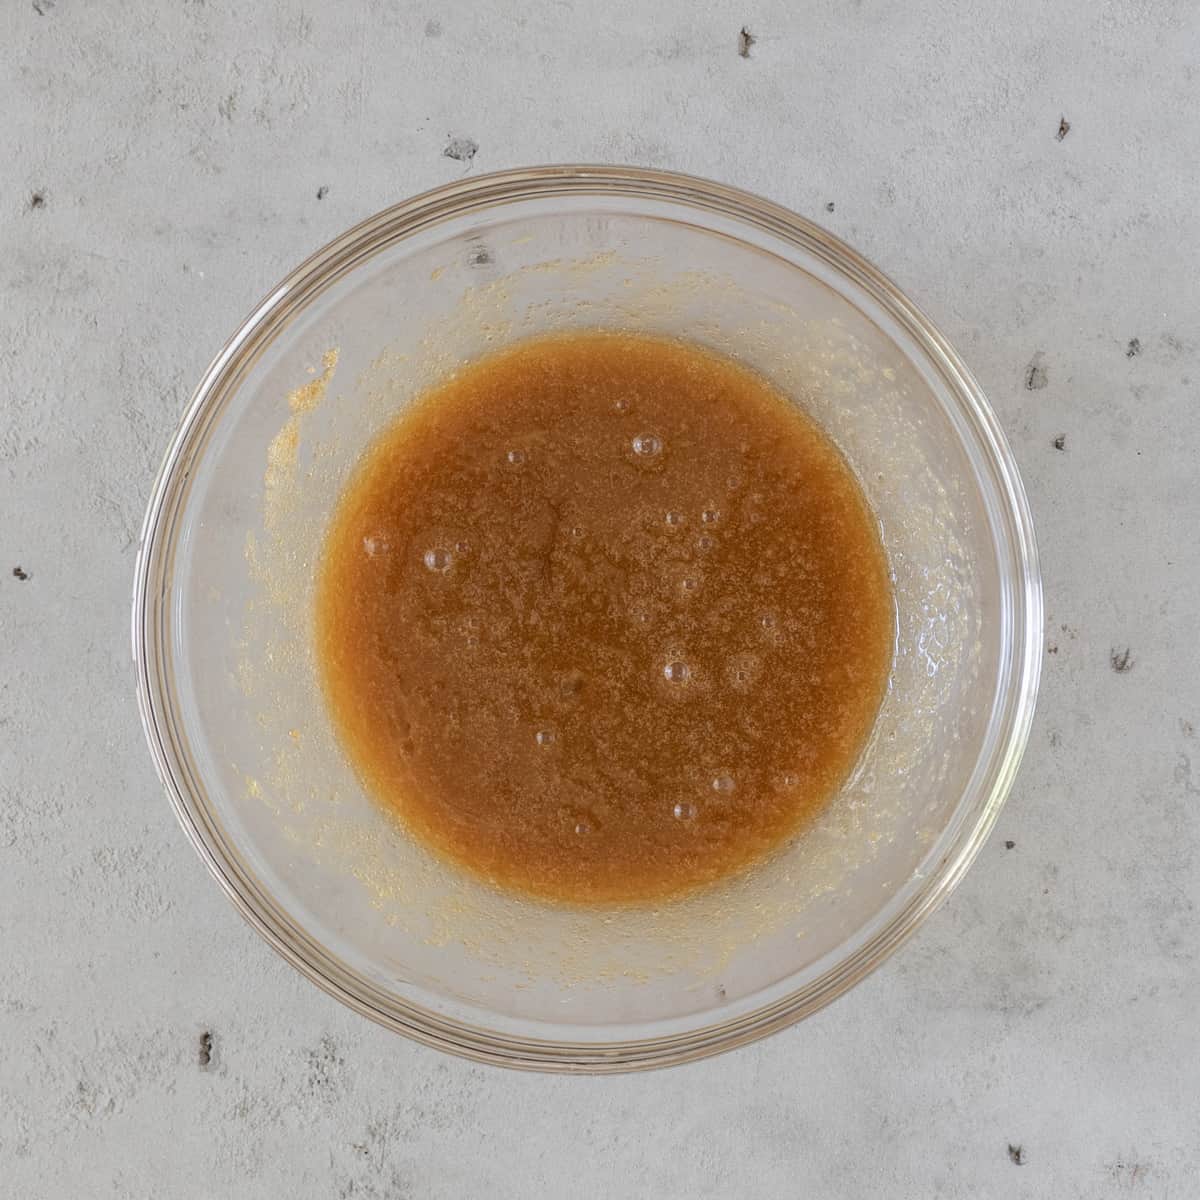 the wet ingredients and brown sugar combined in glass bowl on a grey background.